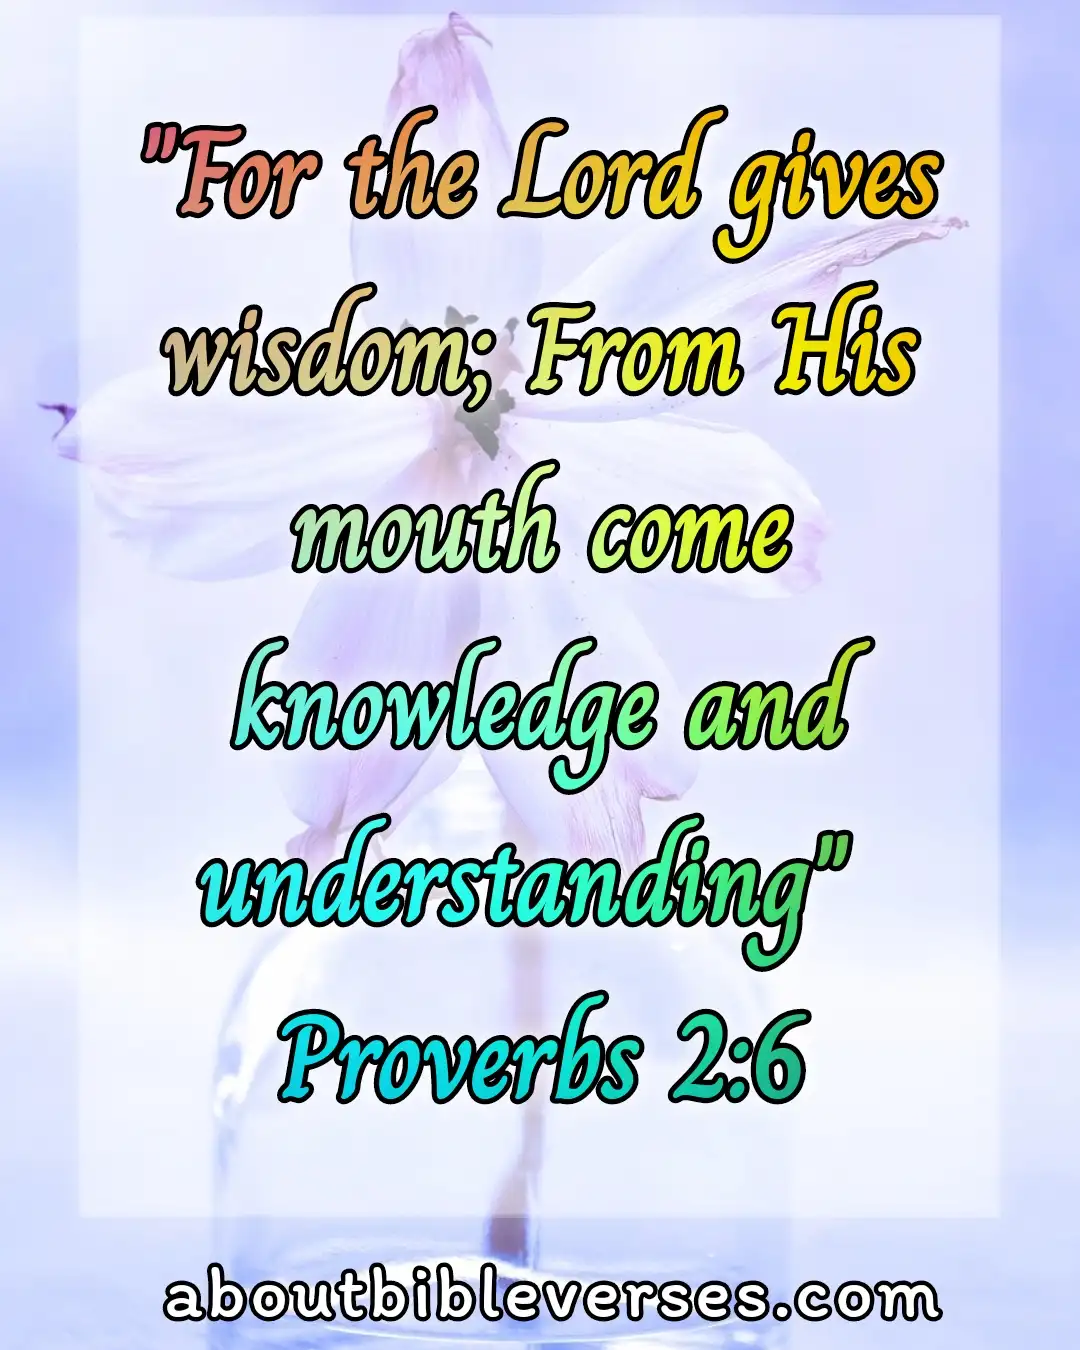 bible verses about wisdom (Proverbs 2:6)